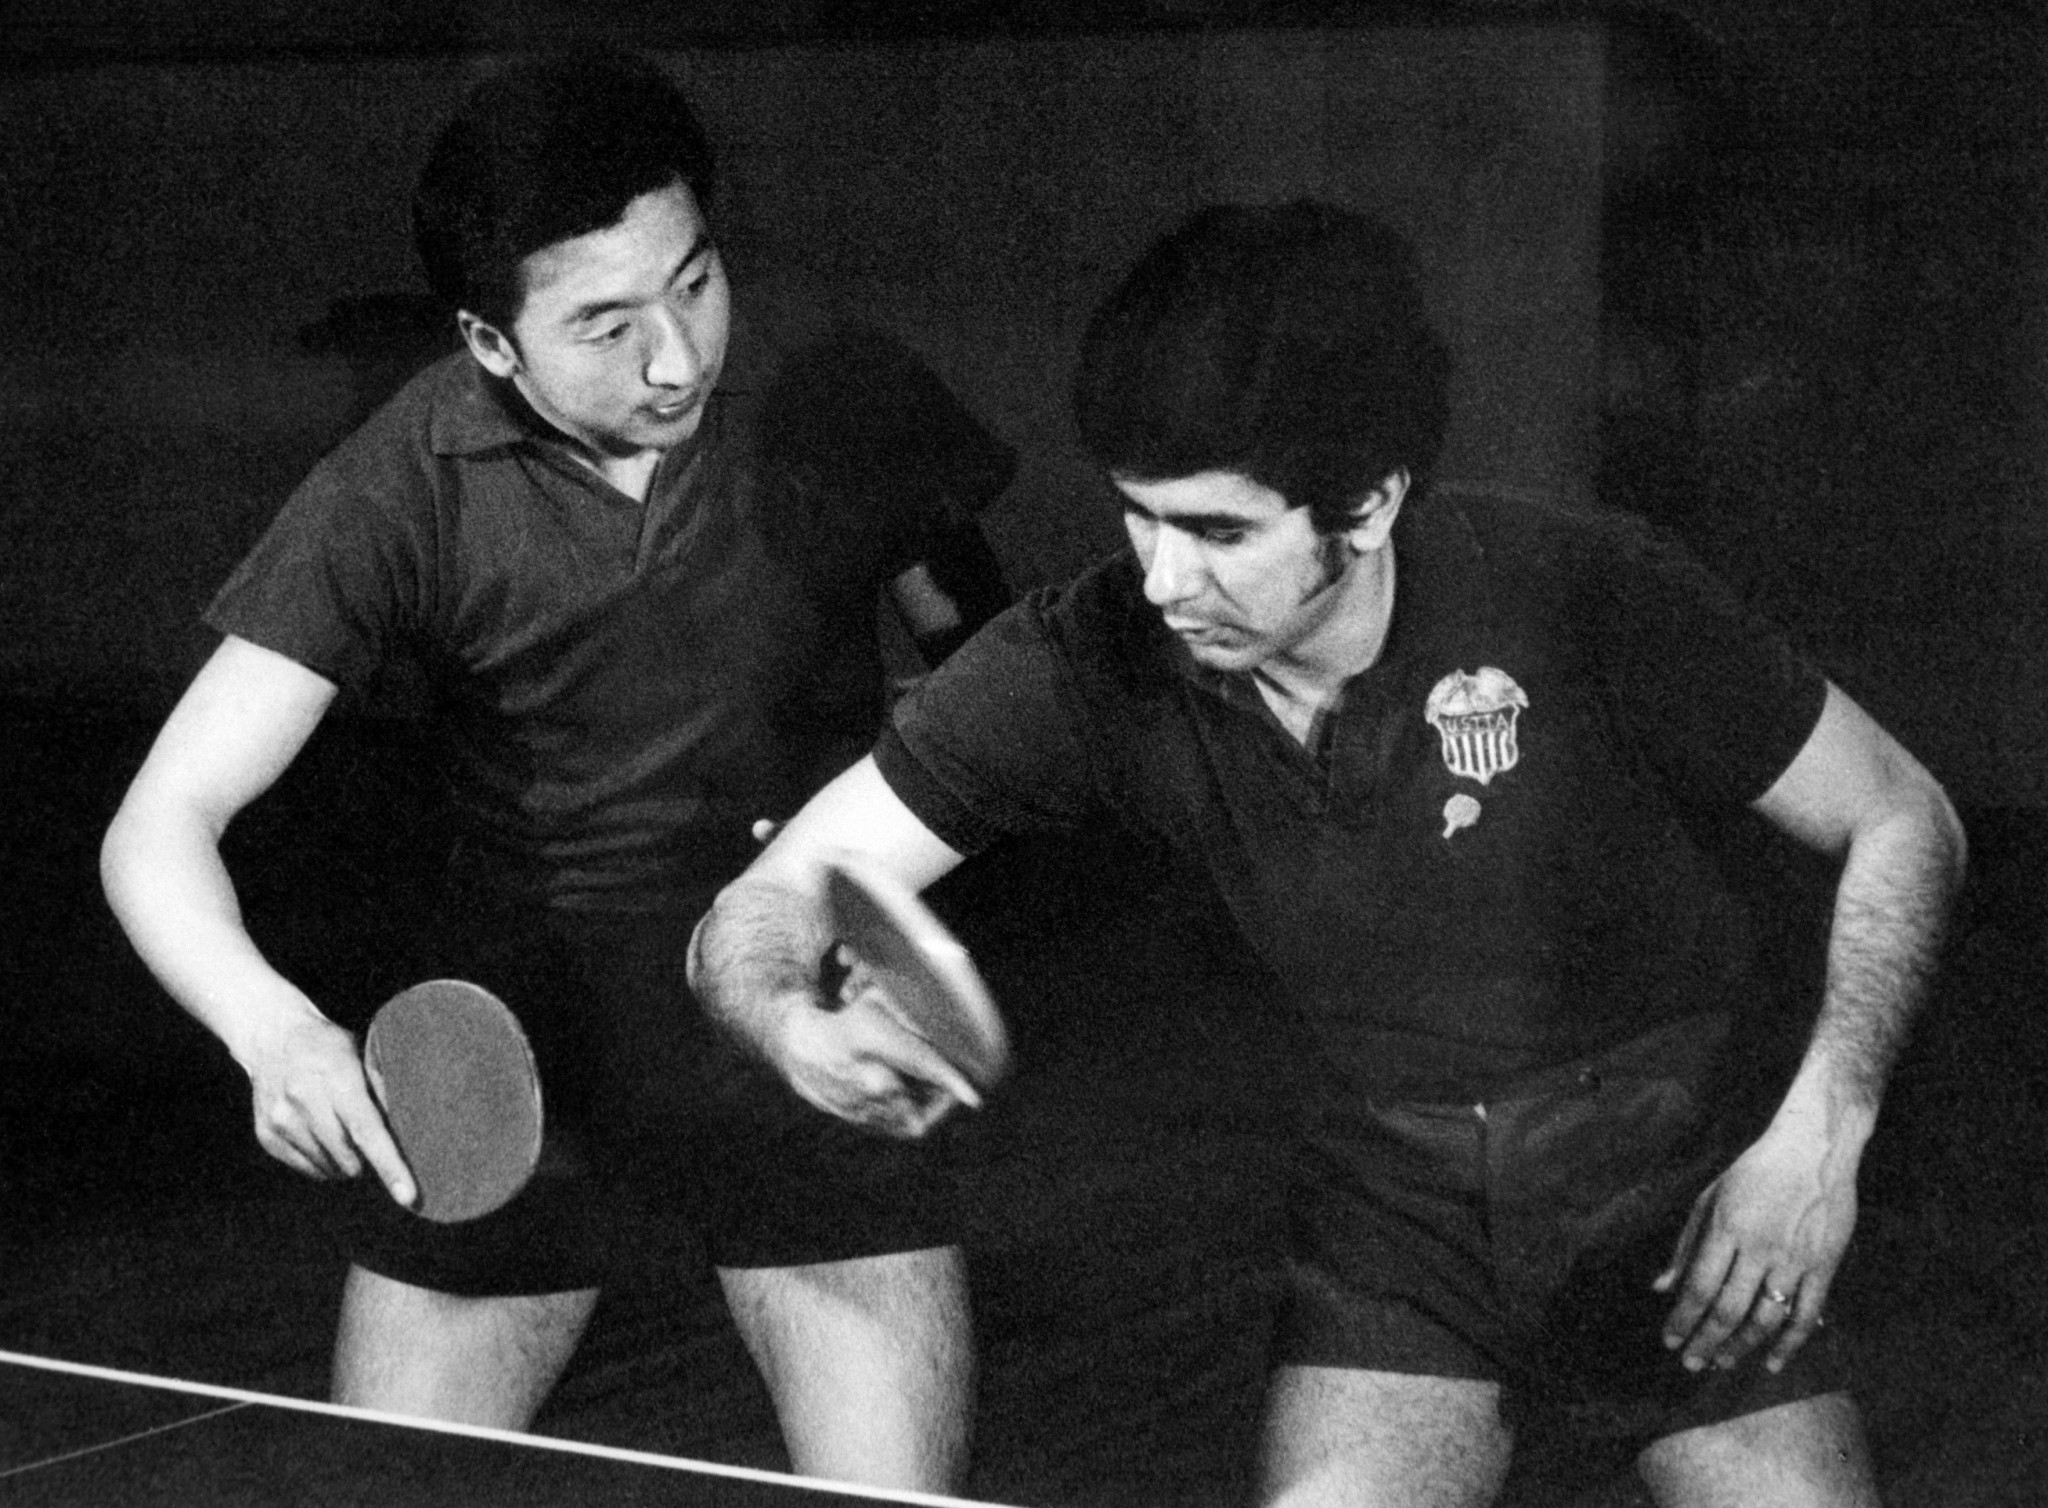 The 2021 and 2022 ITTF World Championships in the United States and China will mark the 50th anniversary of 